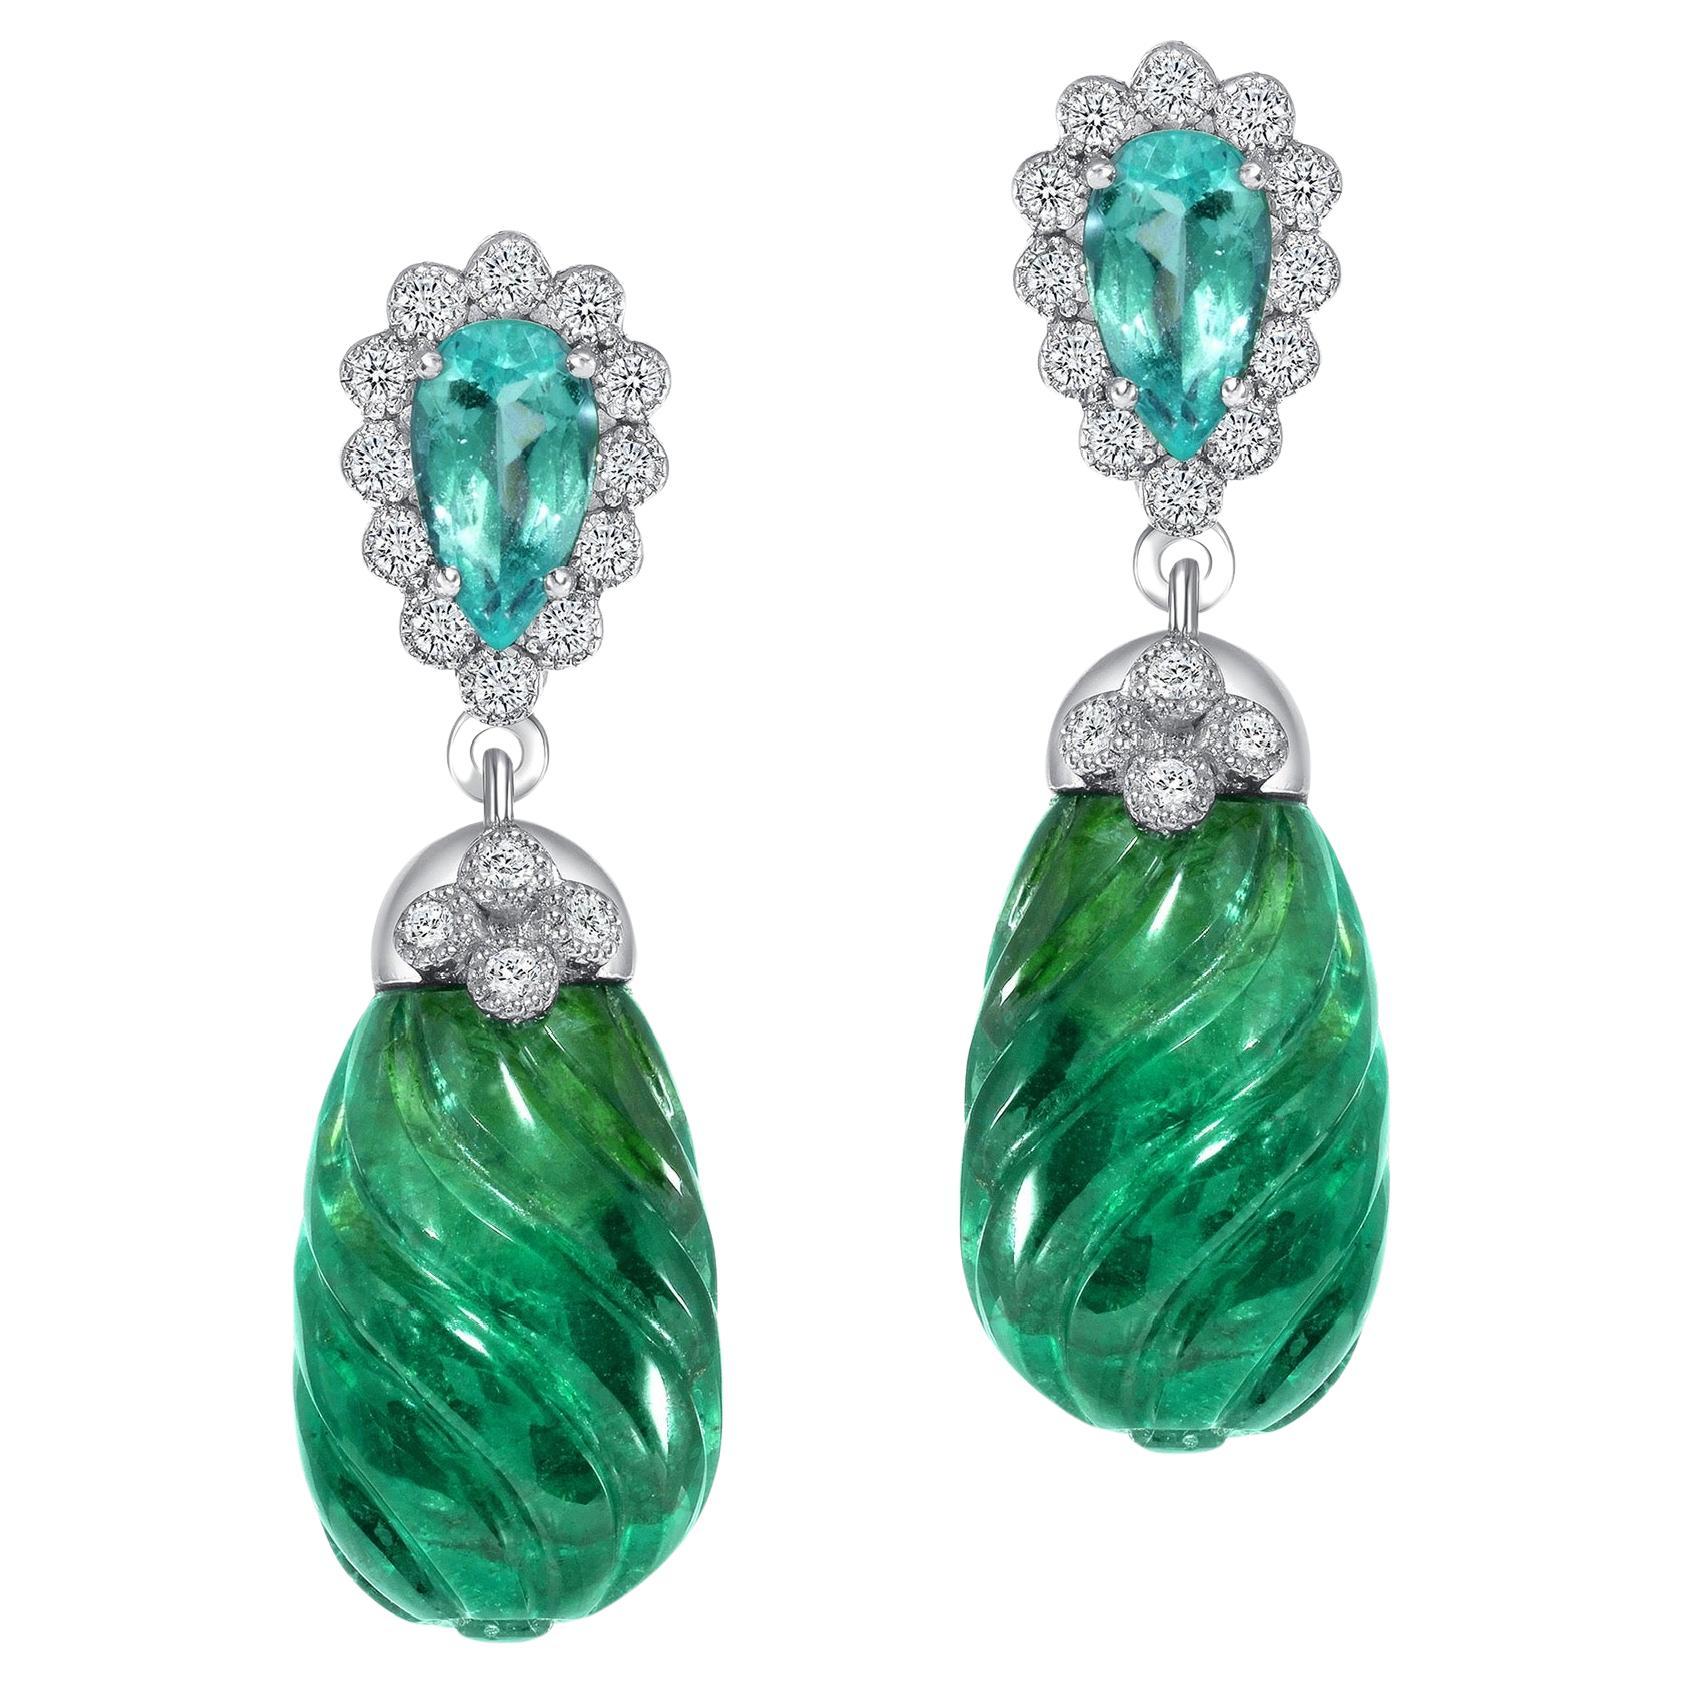 20.77ct Emeralds and 0.71ct Paraiba-type Tourmaline earrings. For Sale